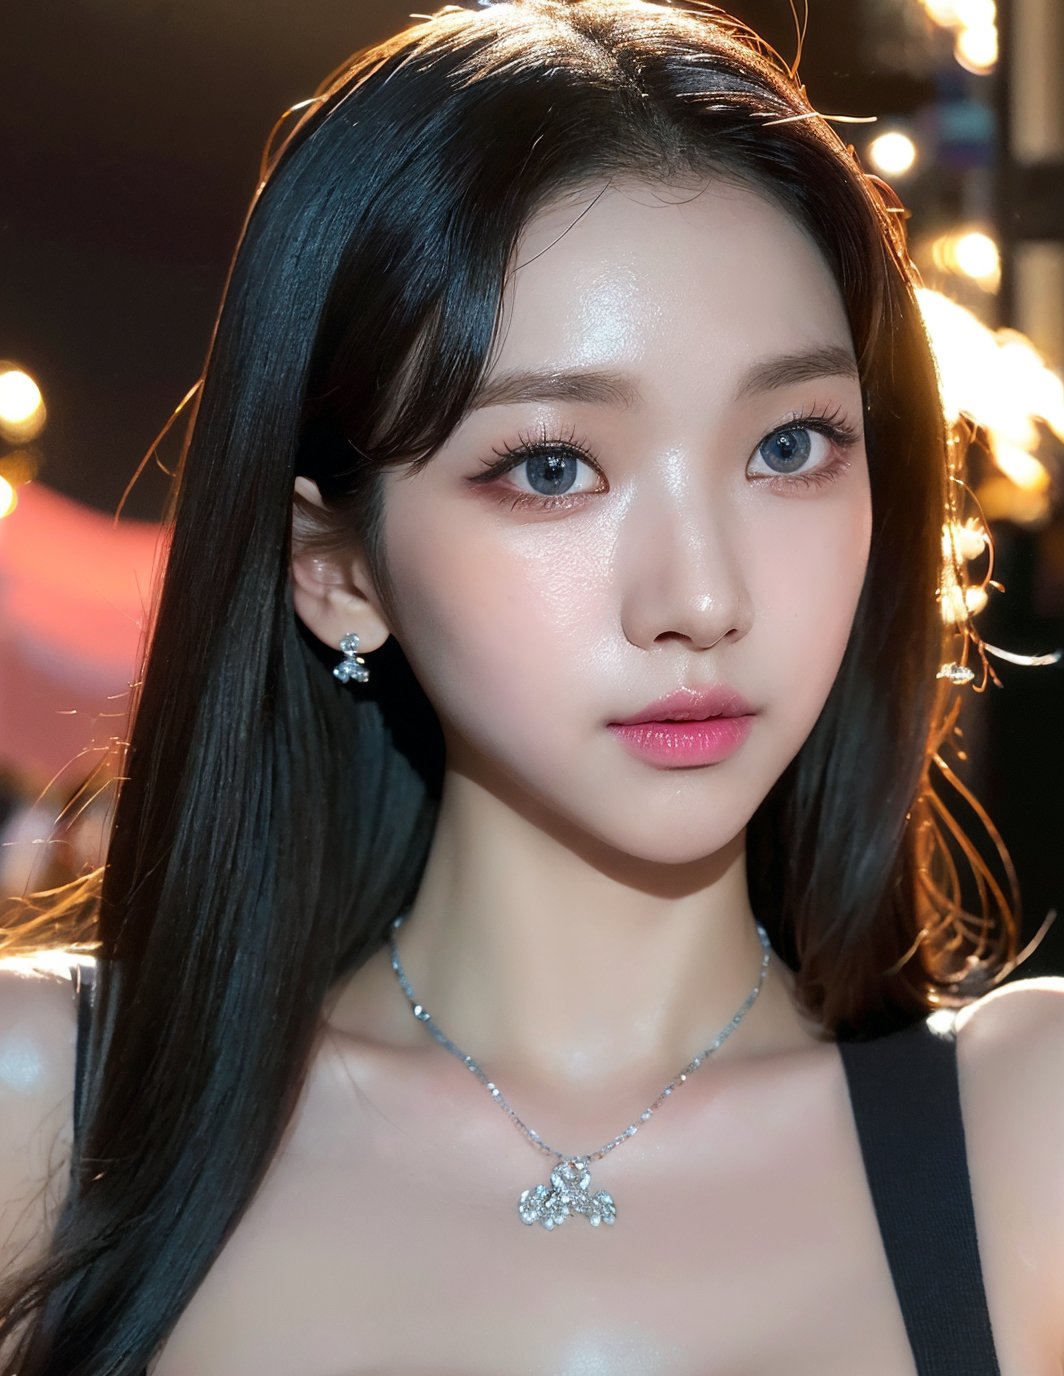 Kyuri, 1 girl, detailed face, a woman with long black hair, smile, (((Nsfw))), outdoor scene, (night light), led lighting, magnificent light, ((fire works)), close up, portrait, upperbody, RAW, (intricate details:1.3), (best quality:1.3), (masterpiece:1.3), (hyper realistic:1.3), best quality, 1 girl, ultra-detailed, ultra high resolution, very detailed mphysically based rendering, dynamic angle, dynamic pose, wind, 8K UHD, Vivid picture, High definition, intricate details, detailed texture, finely detailed, high detail, extremely detailed cg, High quality shadow, a realistic representation of the face, beautiful detailed, (high detailed skin, skin details), slim waist, beautiful and realistic and detailed hands and fingers:1, best ratio four finger and one thumb, (detailed face, detailed eyes, beautiful face), ((korean beauty, kpop idol, ulzzang, korean celebrity, korean cute, korean actress, korean, a beautiful 18 years old beautiful korean girl)), (high detailed skin, skin details), Detailed beautiful delicate face, Detailed beautiful delicate eyes, a face of perfect proportion, (beautiful and realistic and detailed hands and fingers:1.3), (Big breasts:1.3), (full body shot:1.3), (long legs:1.3), (sparkling eyes:1.3), (sparkling lips:1.3), taken by Canon EOS, SIGMA Art Lens 35mm F1.4, ISO 200 Shutter Speed 2000, Vivid ((korean beauty, kpop idol, ulzzang, korean celebrity, korean cute, korean actress, korean, 인스타 여신:1.3, a beautiful 18 years old beautiful korean girl)), (blue eye), (black long hair),chanel_jewelry, chanel_bag, vancleef_necklace,Nice legs and hot body, see-through,hourglass bodyshape ,Kyuri,photorealistic